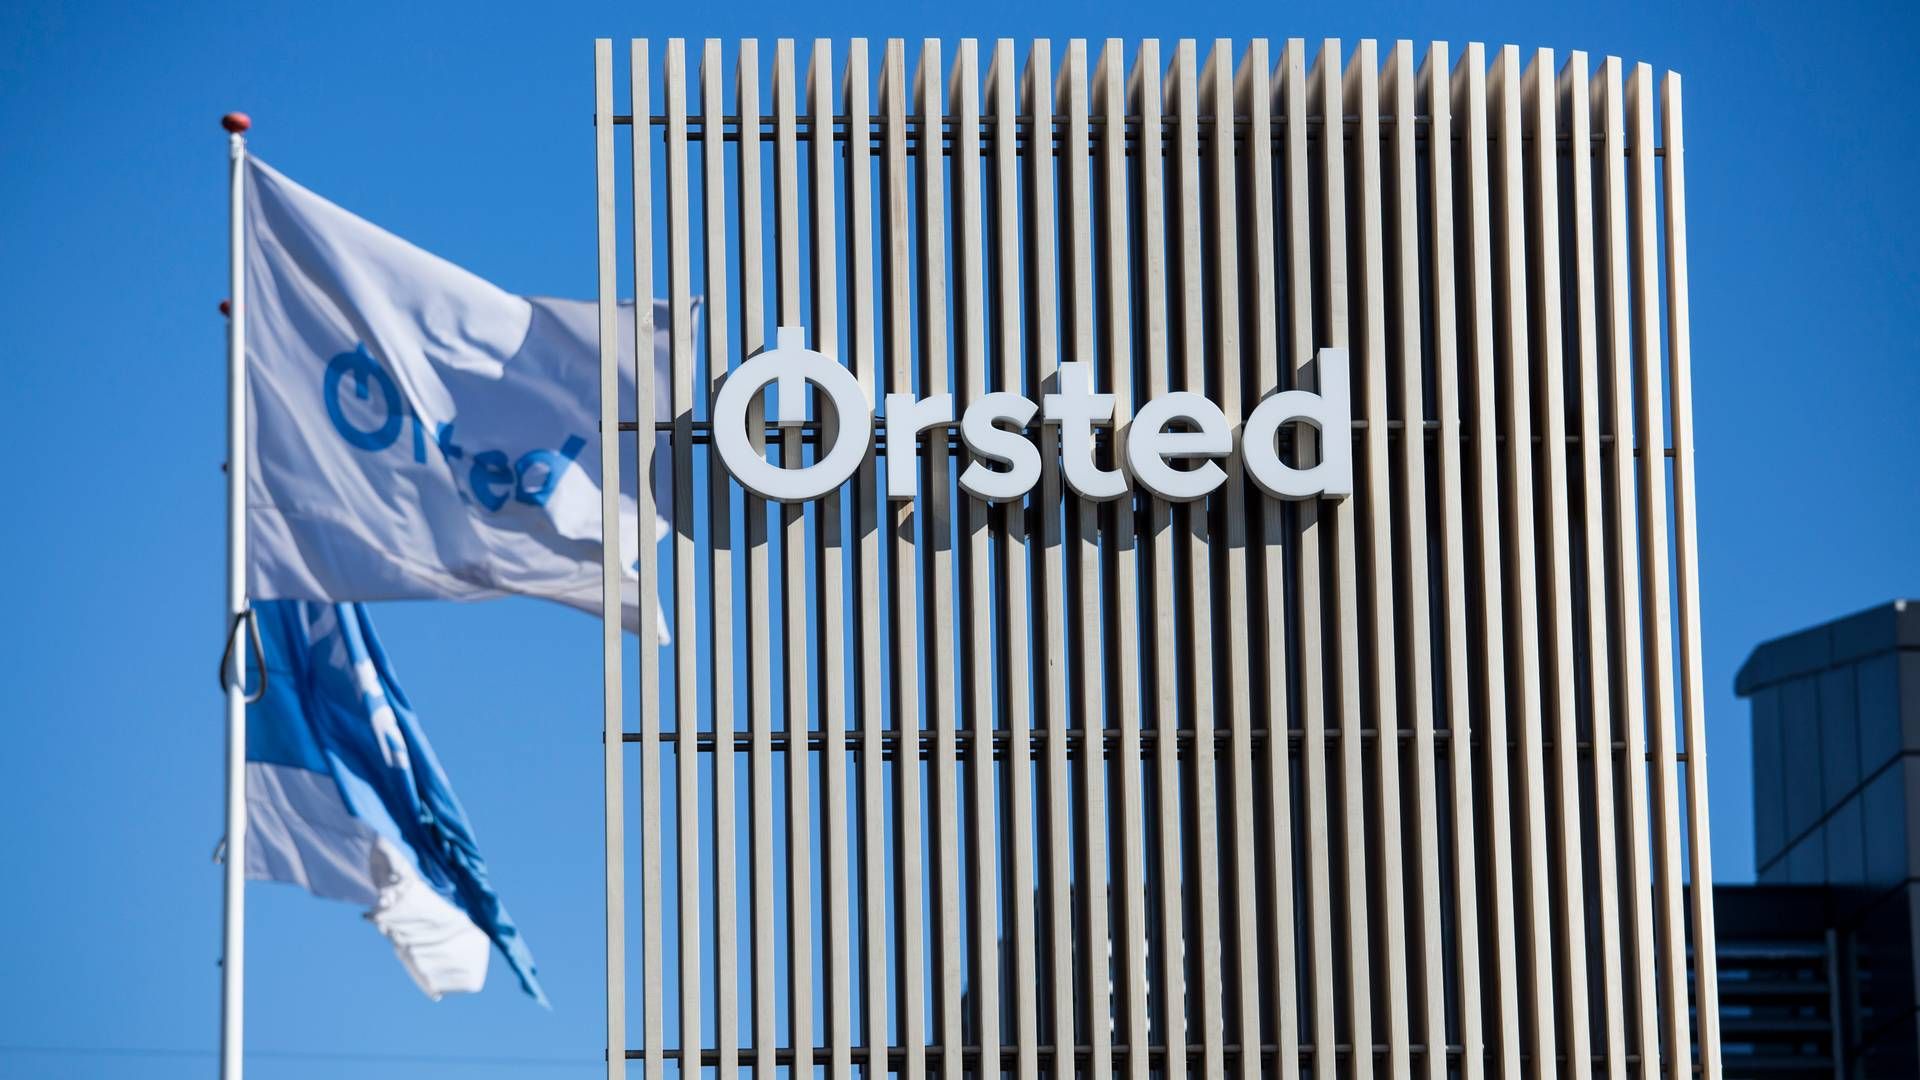 The Danish energy company expects to collect advantaging tax credits in the US in the future. | Photo: Ørsted